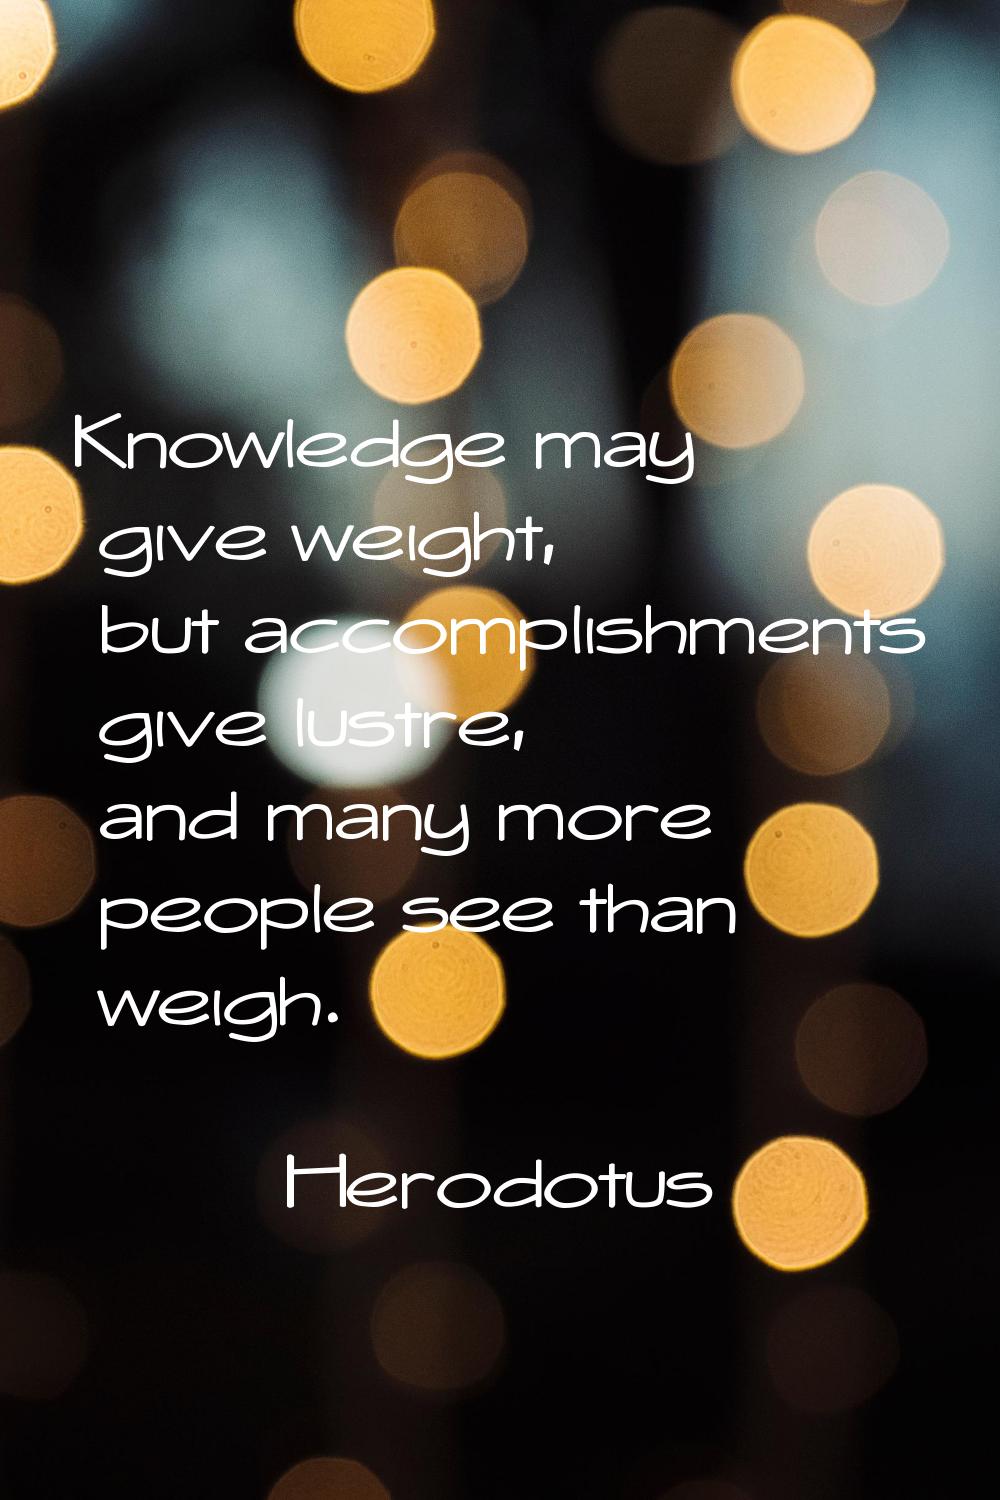 Knowledge may give weight, but accomplishments give lustre, and many more people see than weigh.